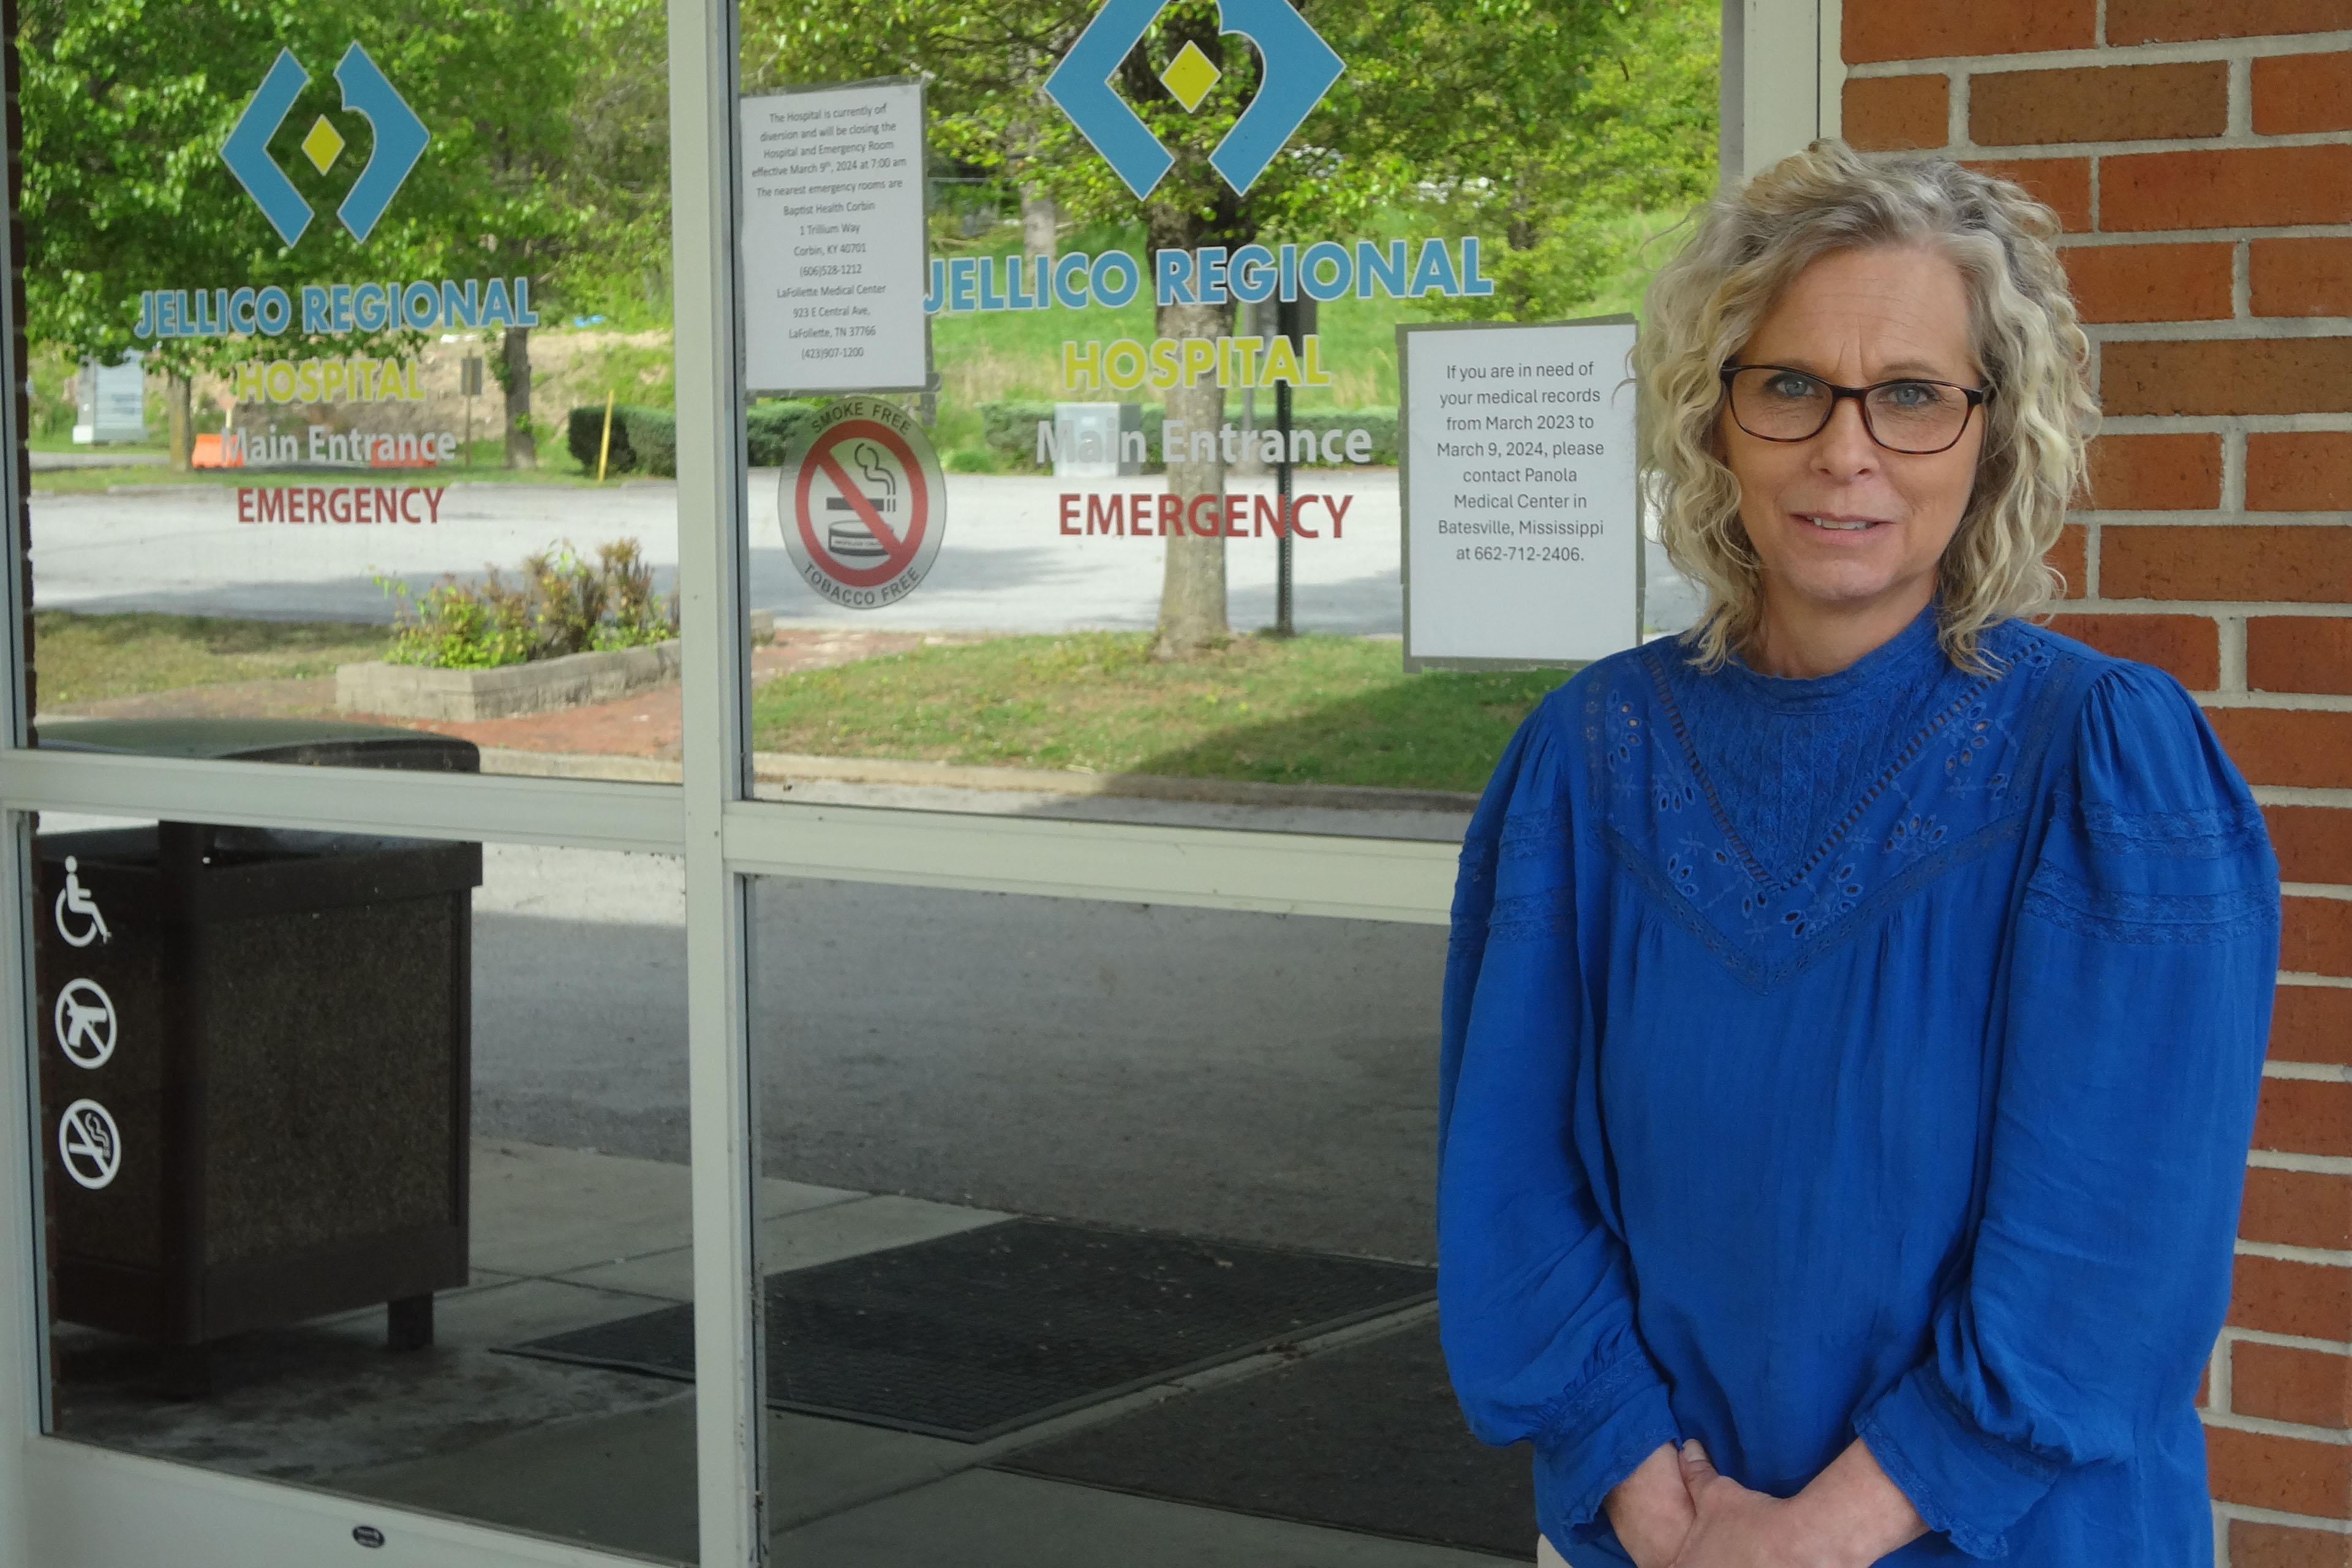 Sandy Terry, wearing a bright blue blouse, stands next to the glass doors that mark the entrance to the old Jericho Medical Center.